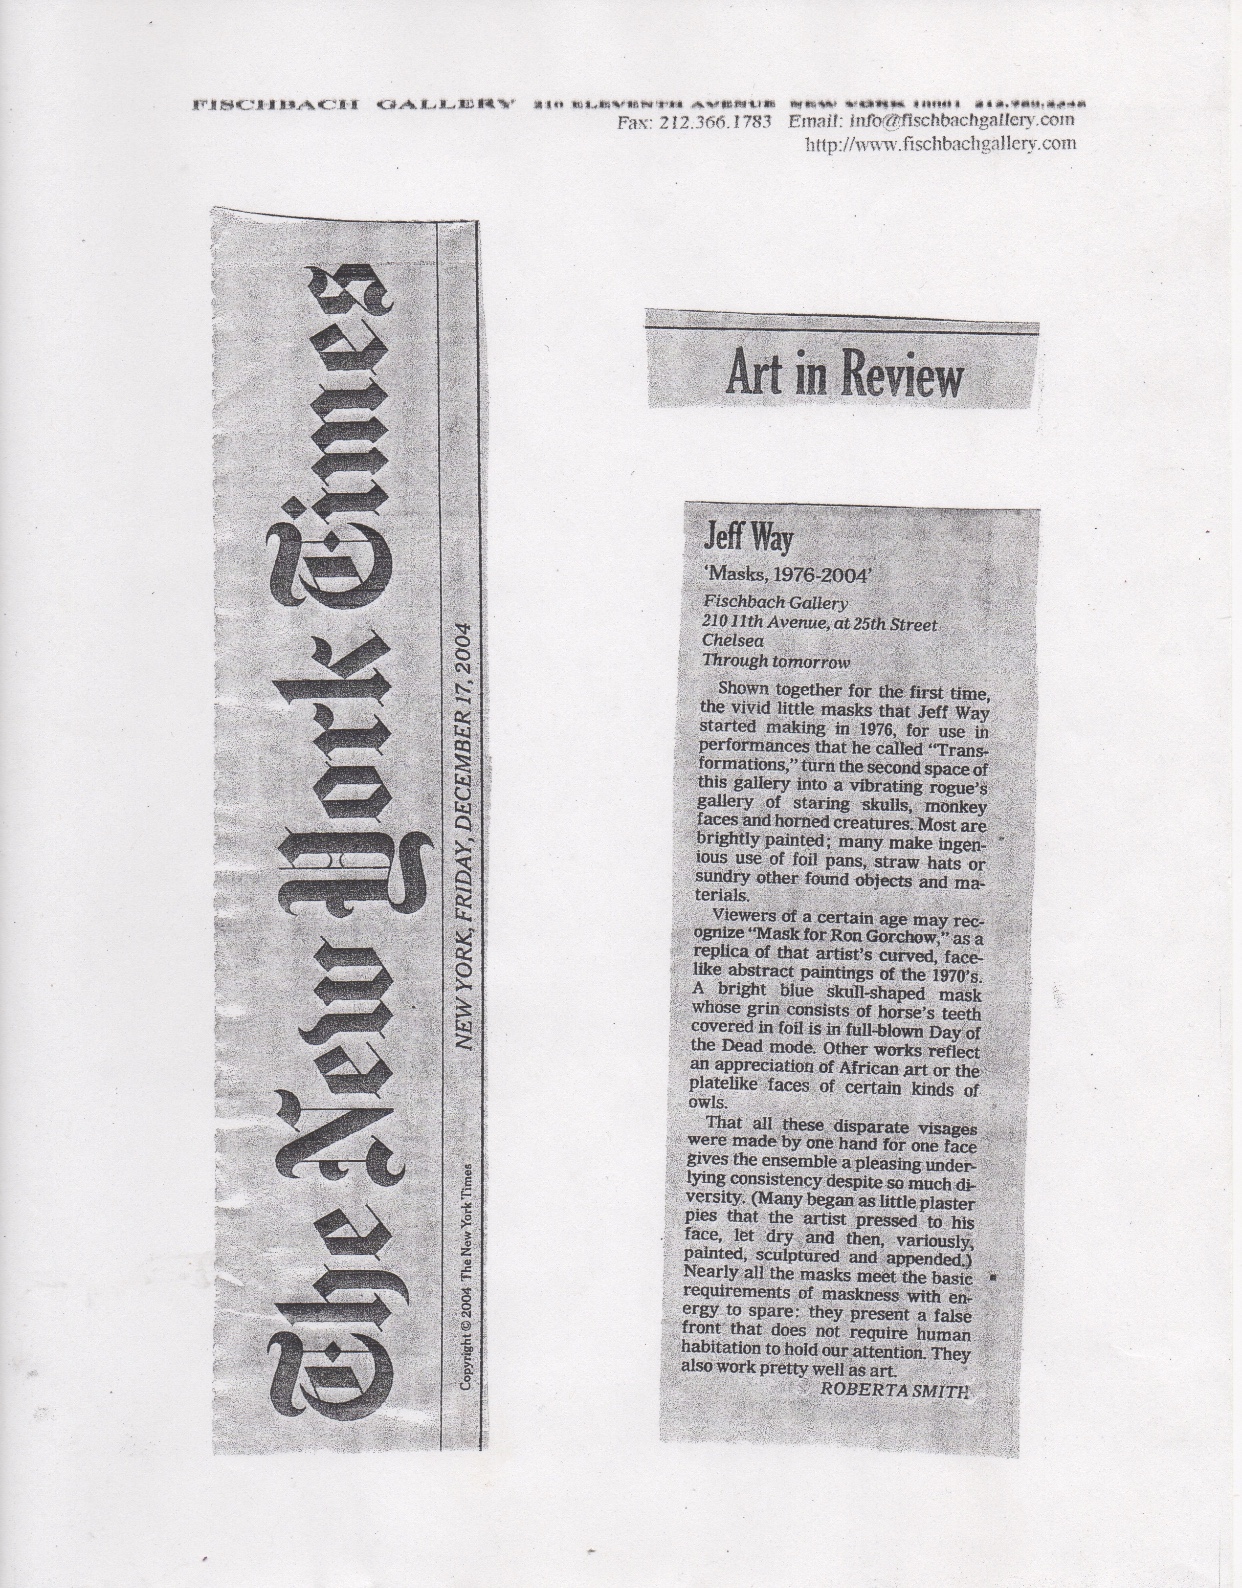 Art in Review, Smith Roberta, New York Times, 2004